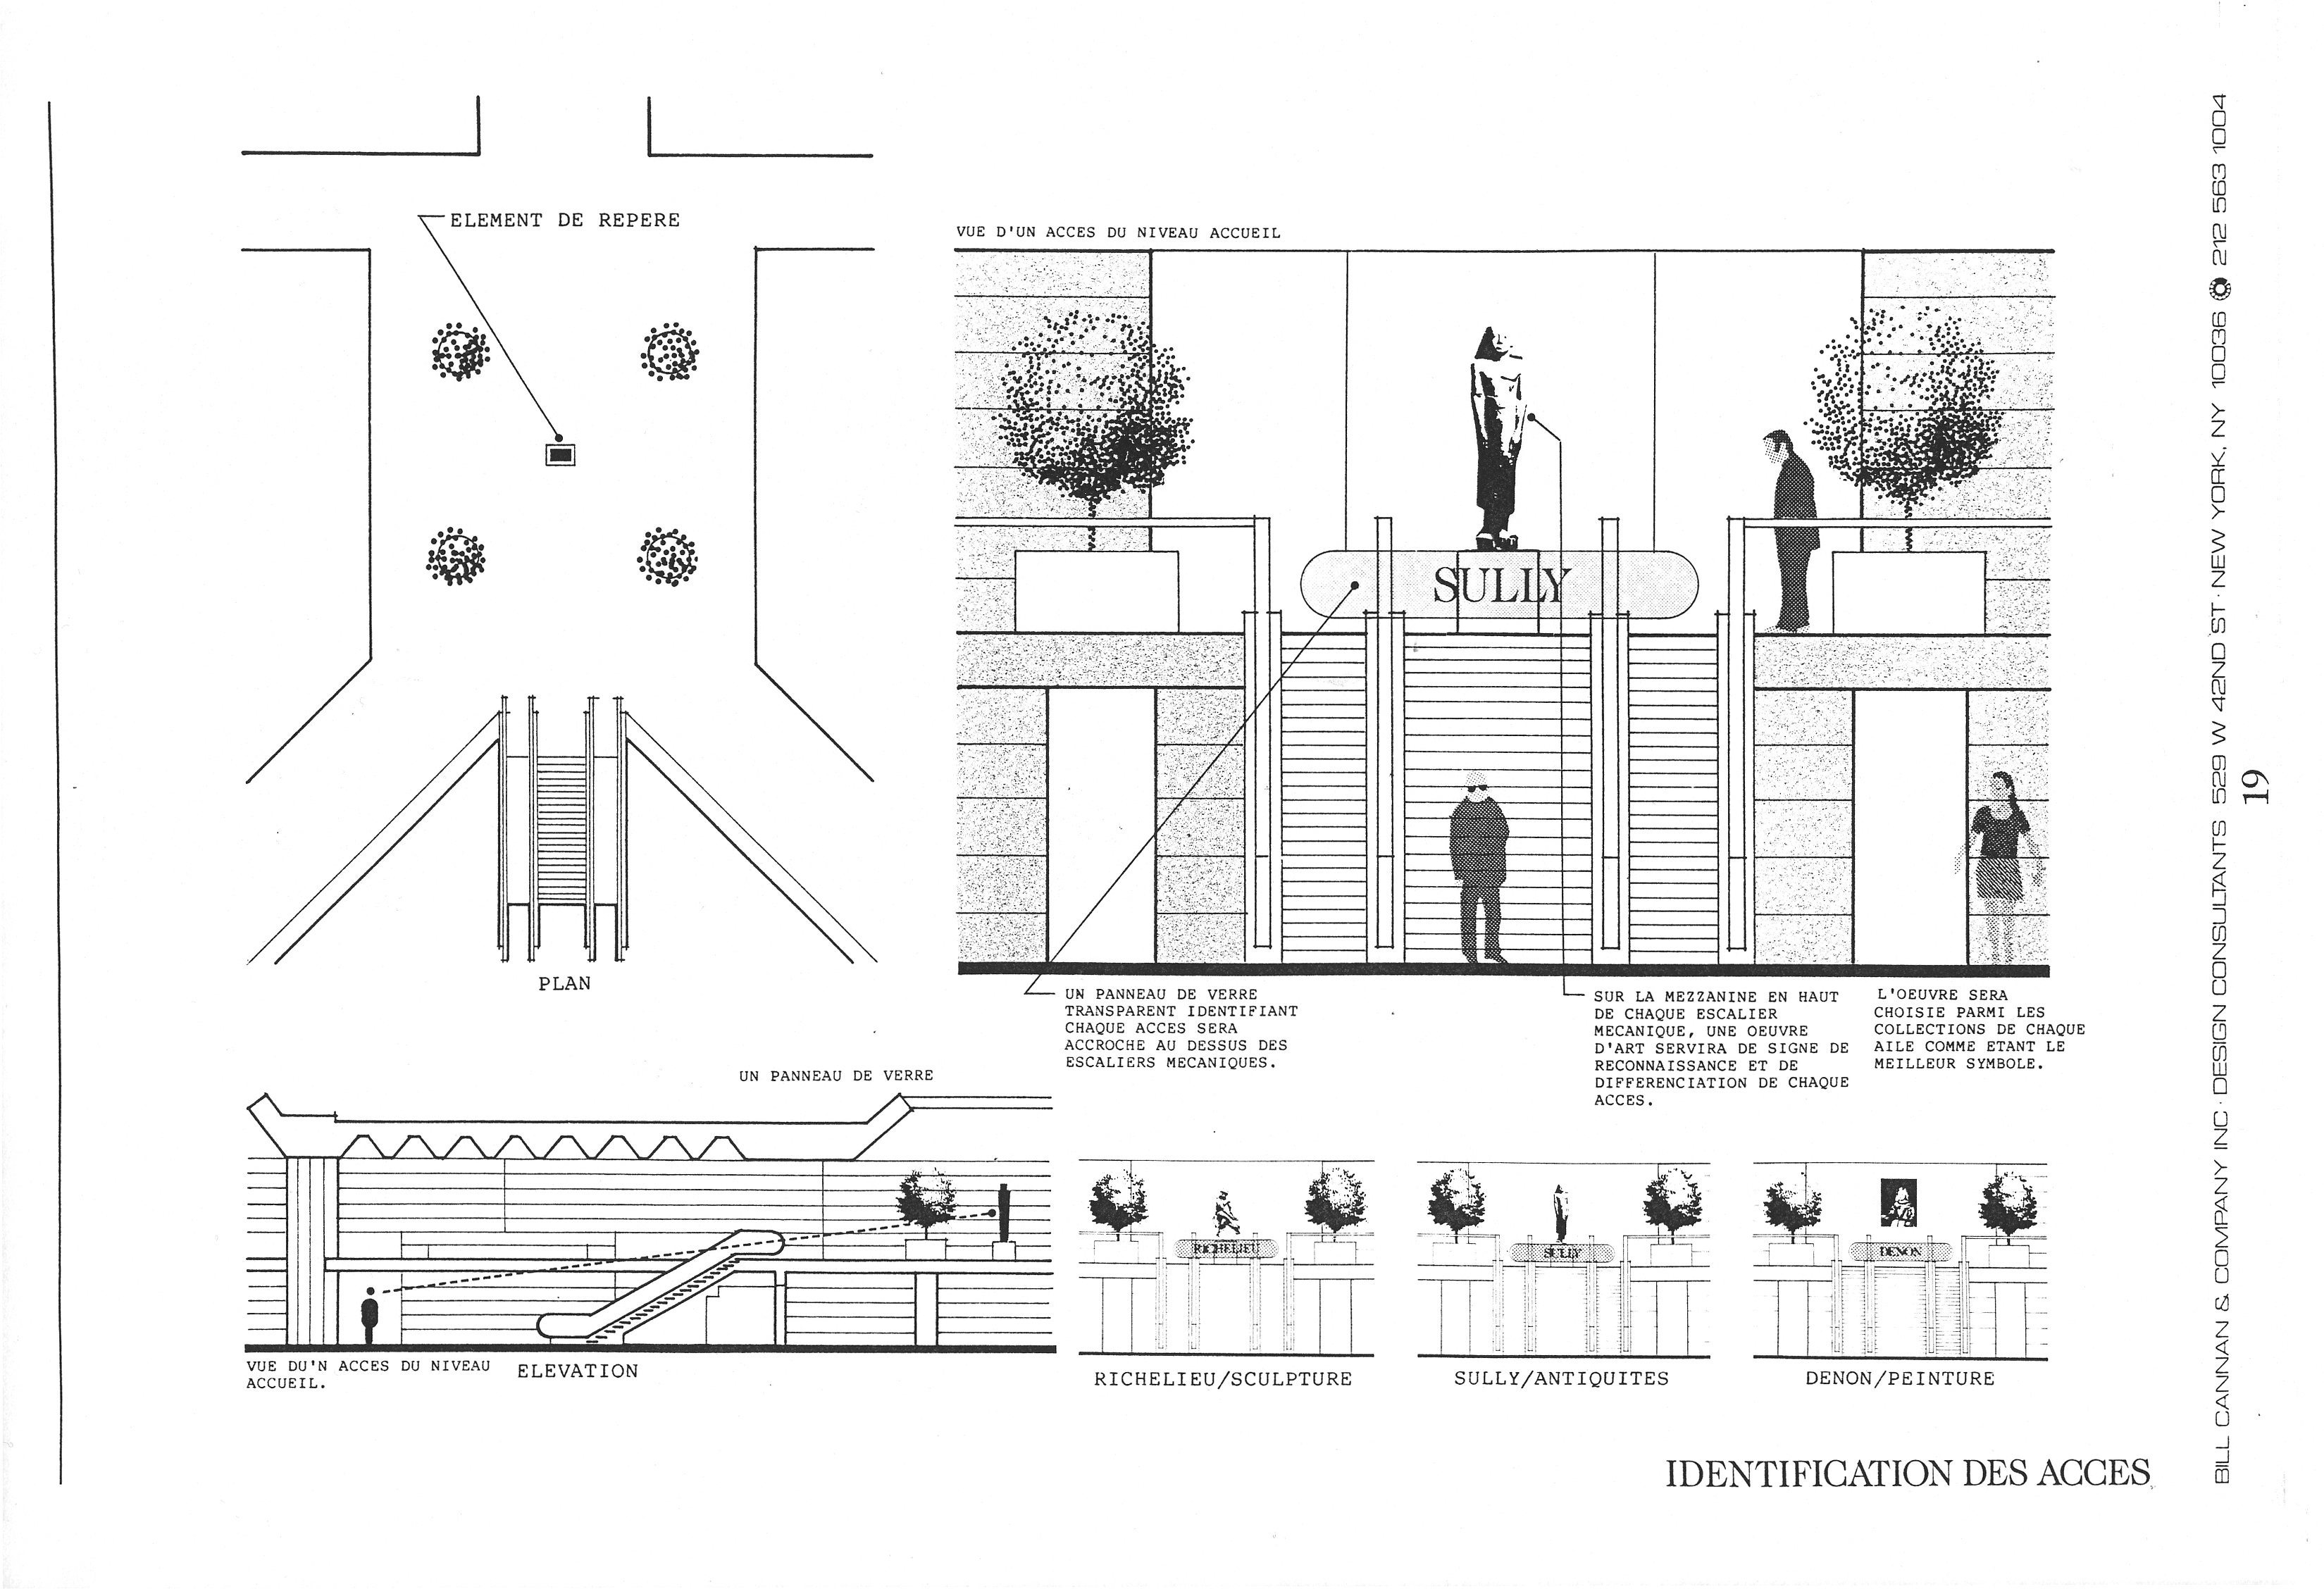 Diagrams of the Sully Entrance from various perspectives.